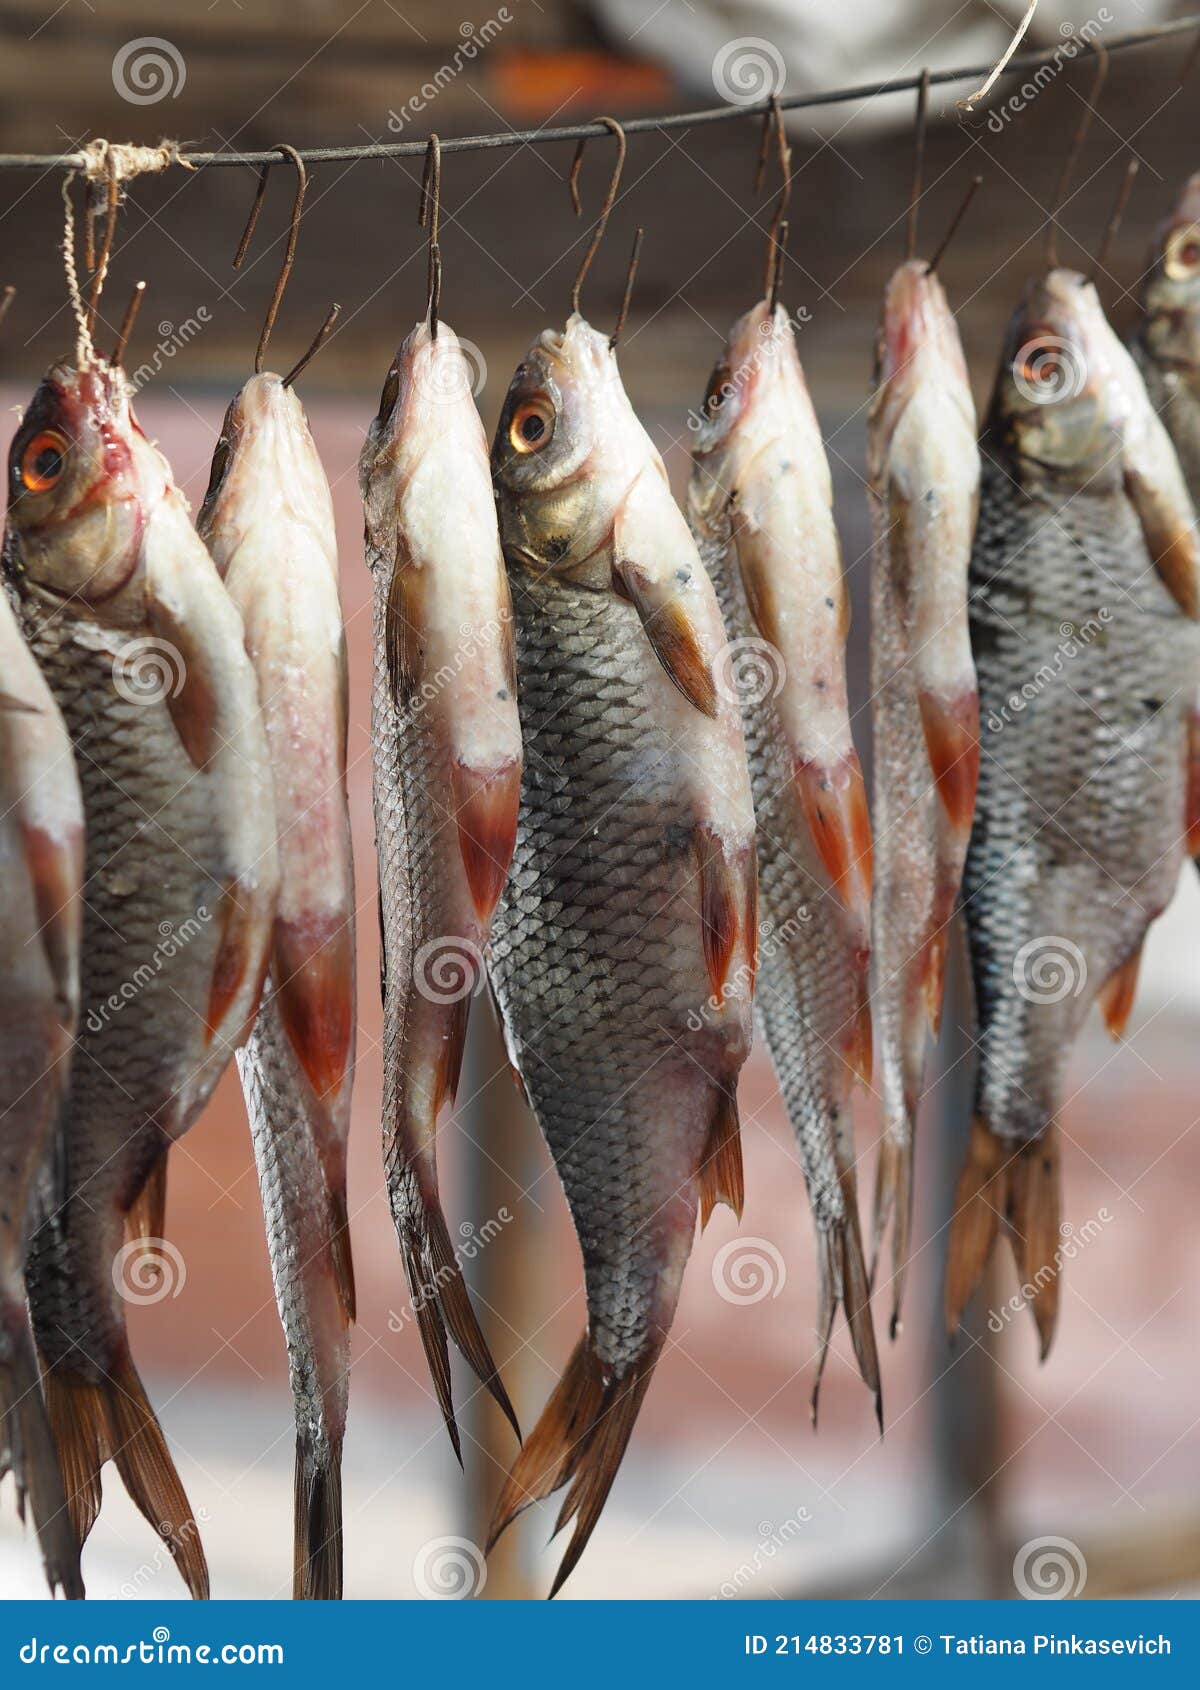 https://thumbs.dreamstime.com/z/river-fish-caught-winter-fishing-hang-hooks-wire-dry-natural-healthy-product-214833781.jpg